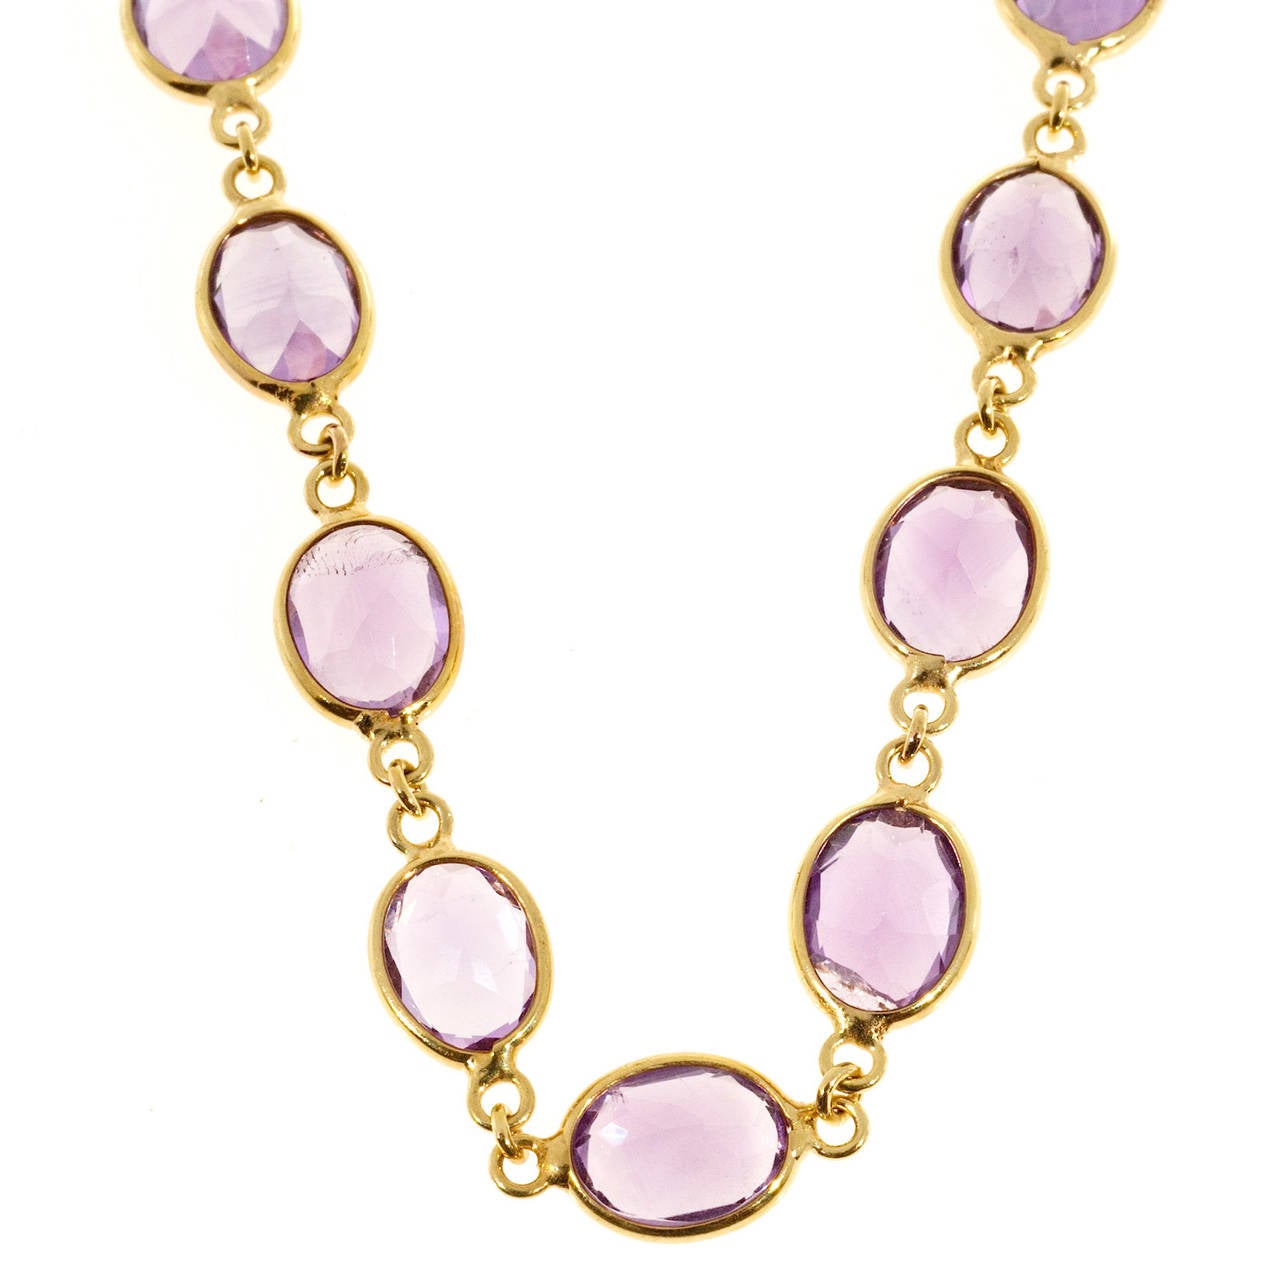 Amethyst by the Yard hinged oval link   necklace with 35.00cts of bright purple Amethyst.

28 8 x 6mm fine oval genuine Amethyst, approx. total weight 35.00cts
14k Yellow Gold
Stamped: 14k 585 Italy
12.4 grams
Bezel width: 7.1mm
Length: 16